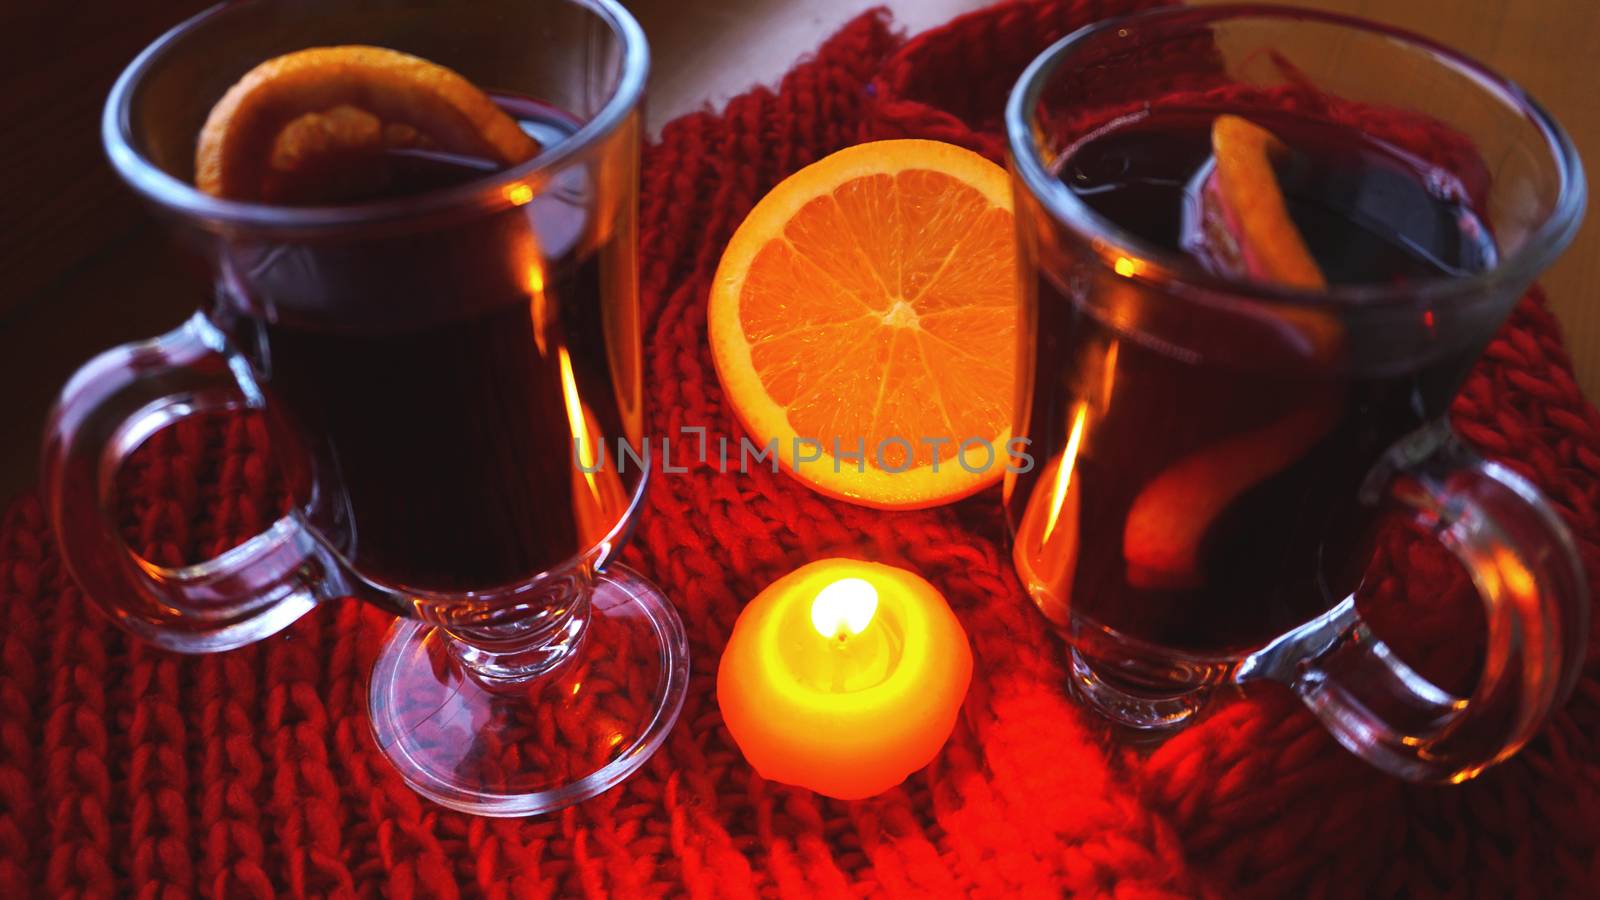 Mulled wine in glass mugs, burning candle on a dark red background. Red Hot wine by natali_brill